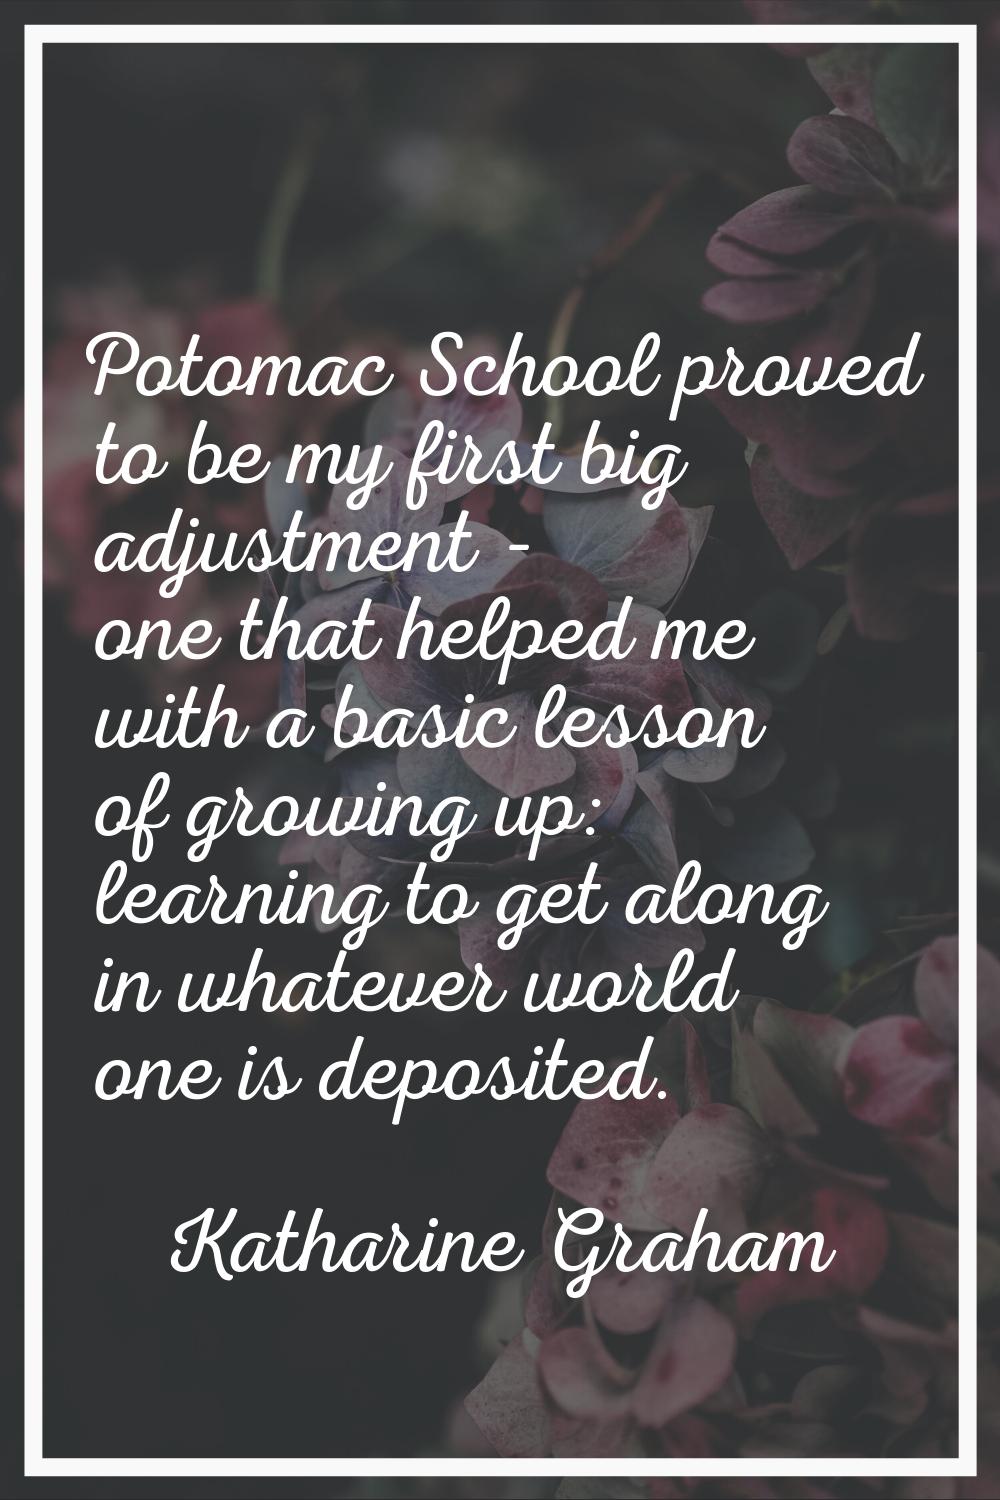 Potomac School proved to be my first big adjustment - one that helped me with a basic lesson of gro